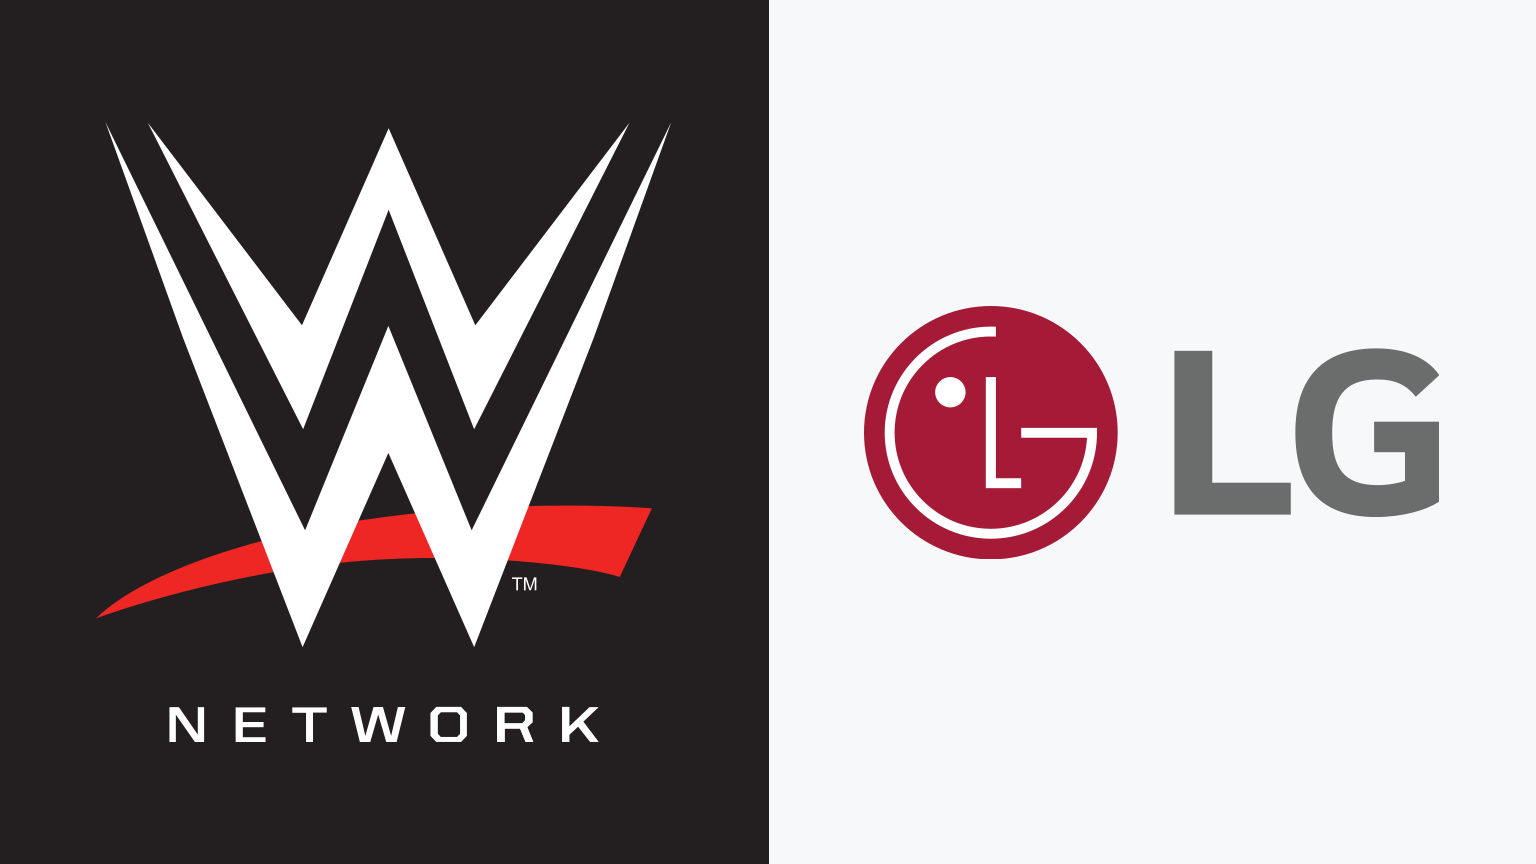 How to Watch WWE Network on LG Smart TV